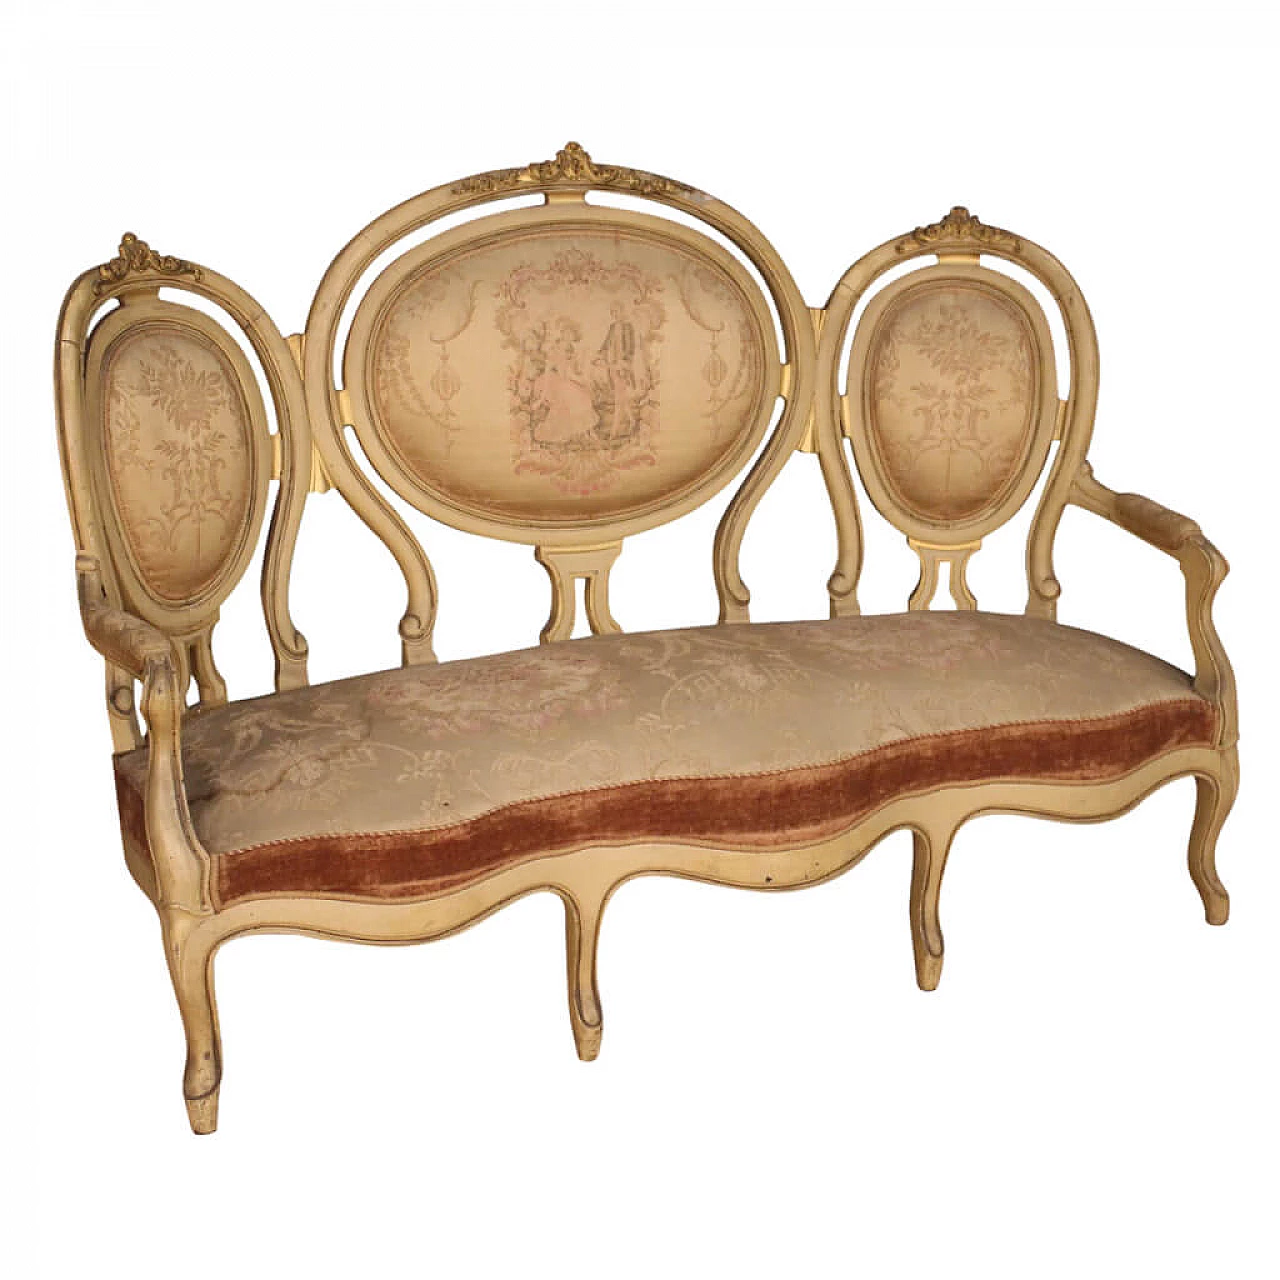 Lacquered and gilded antique French sofa from the 19th century 1086993